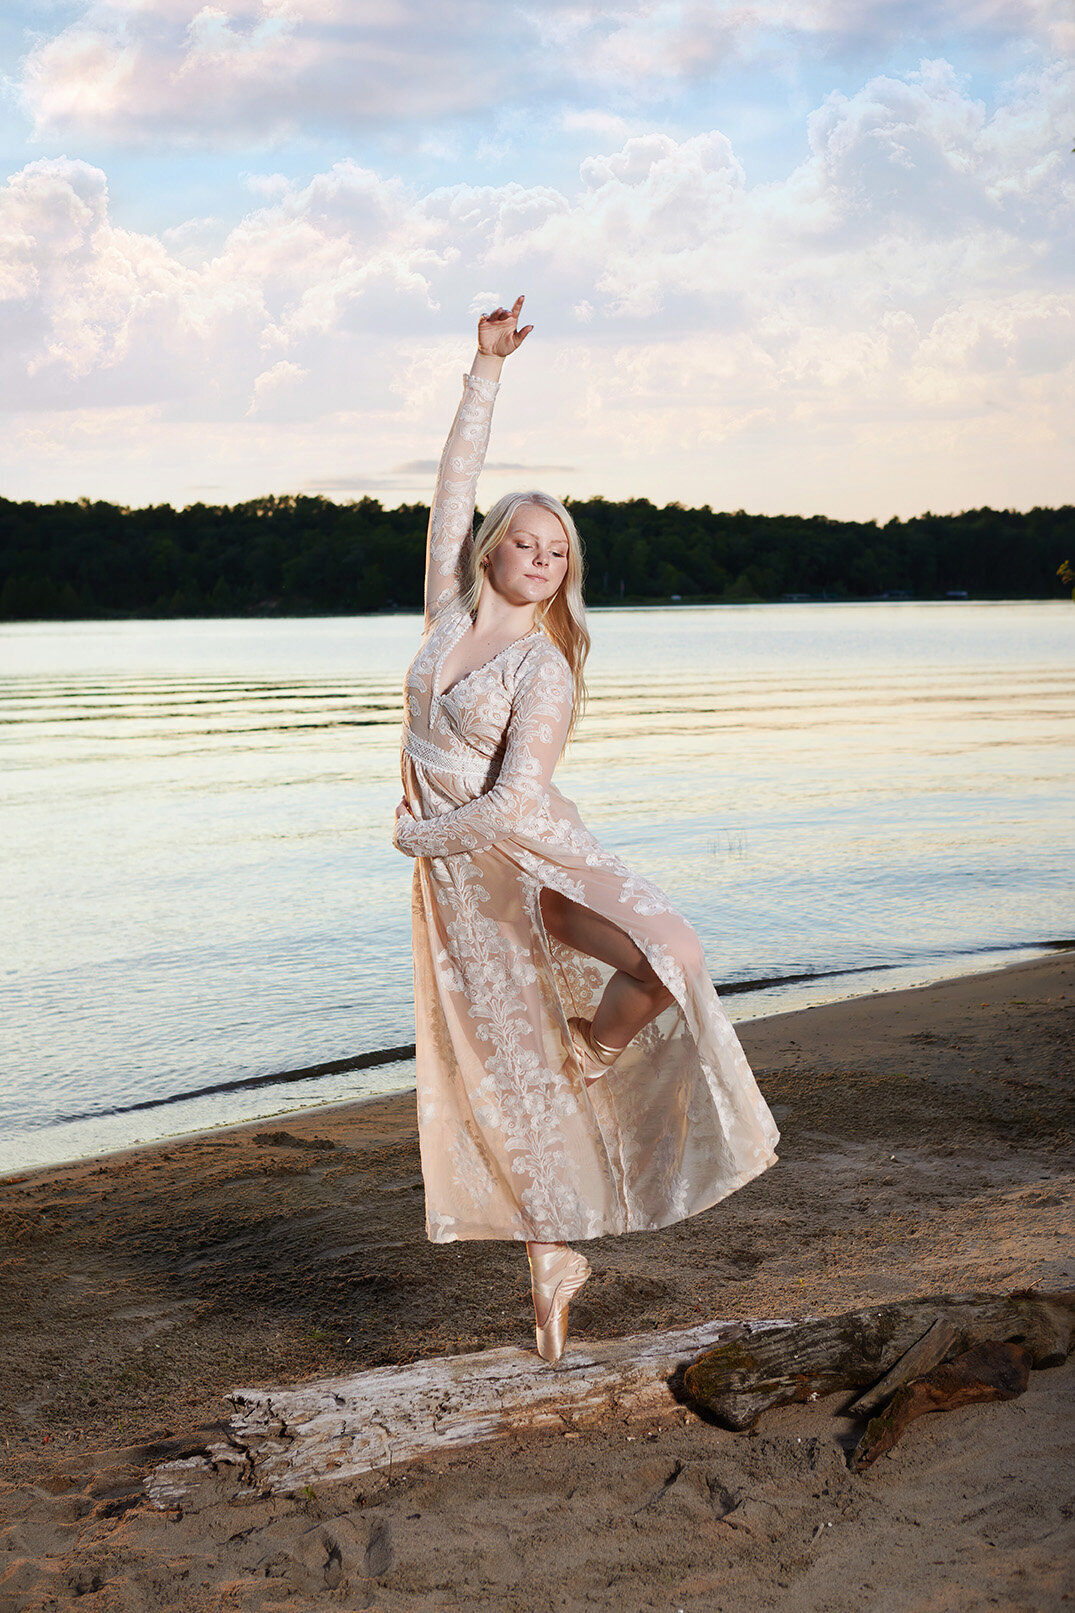 Blonde haired high school senior girl strikes a ballerina pose on dead tree laying on the beach Leech Lake wearing long pink lace dress.